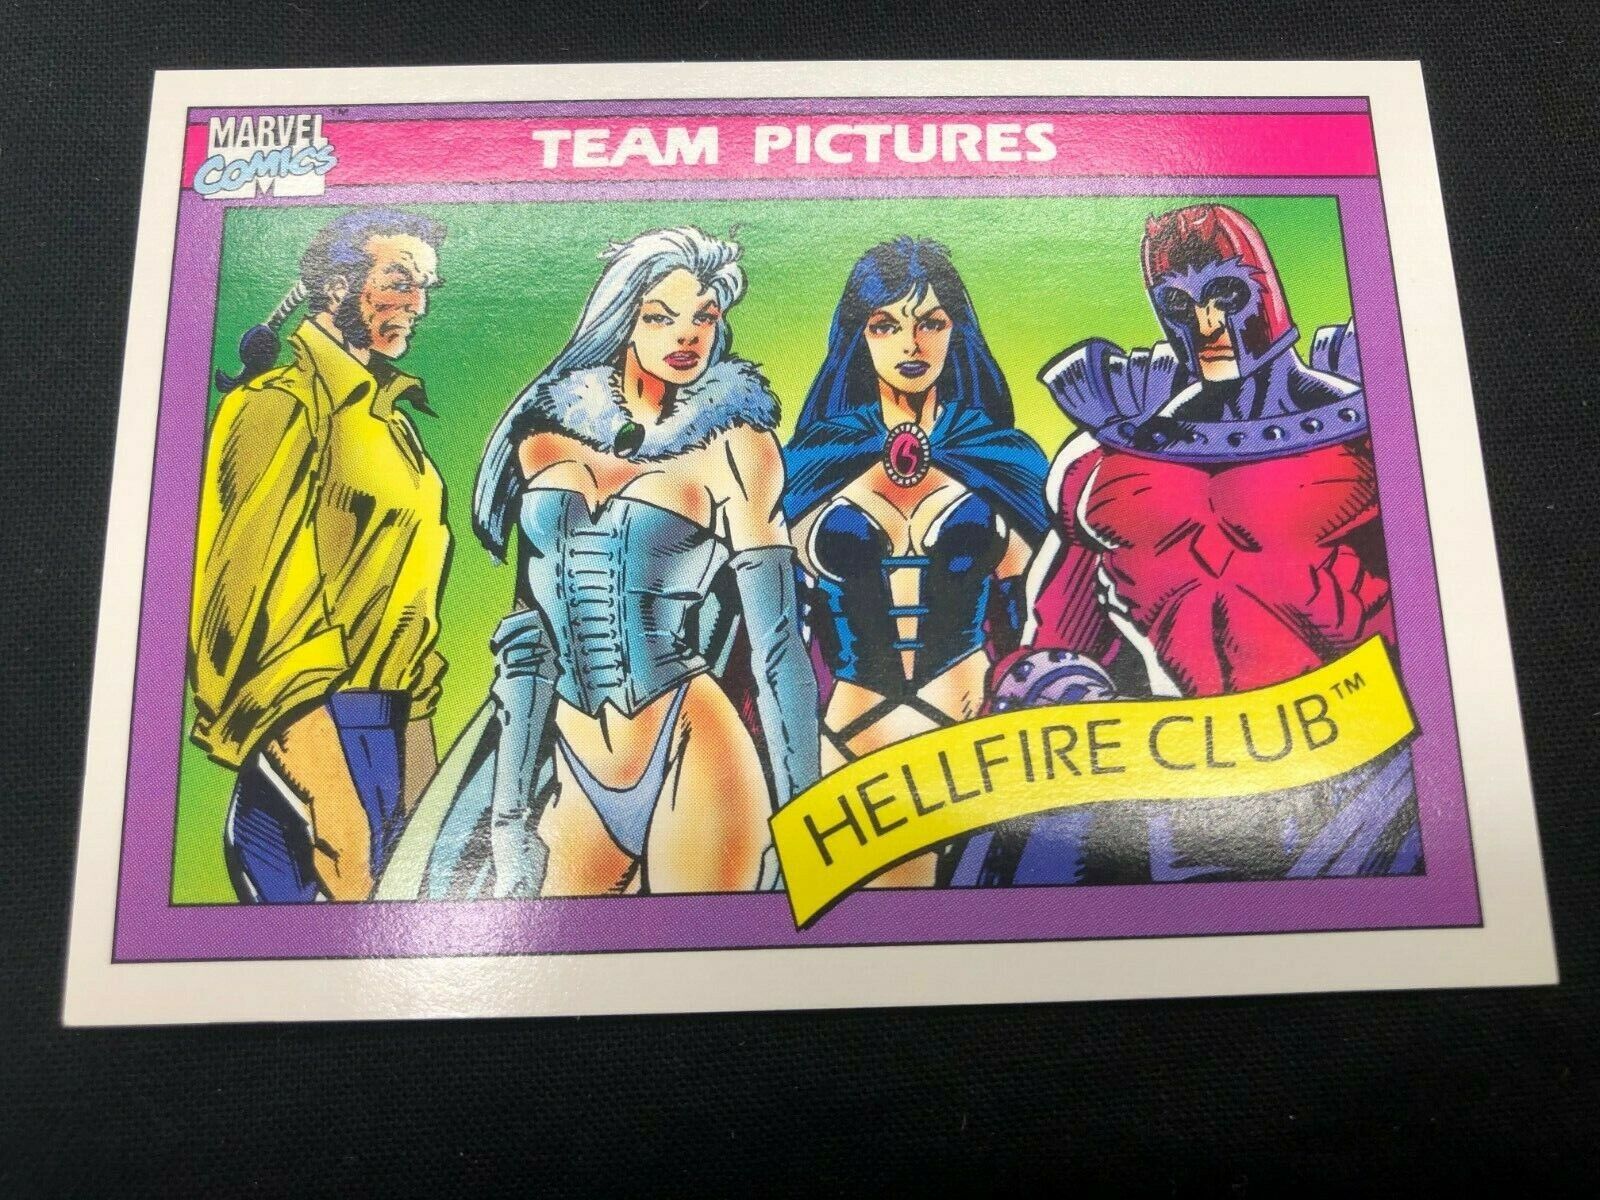 1990 Impel Marvel Comics Team Pictures Series 1 Trading Card: Hellfire Club #147